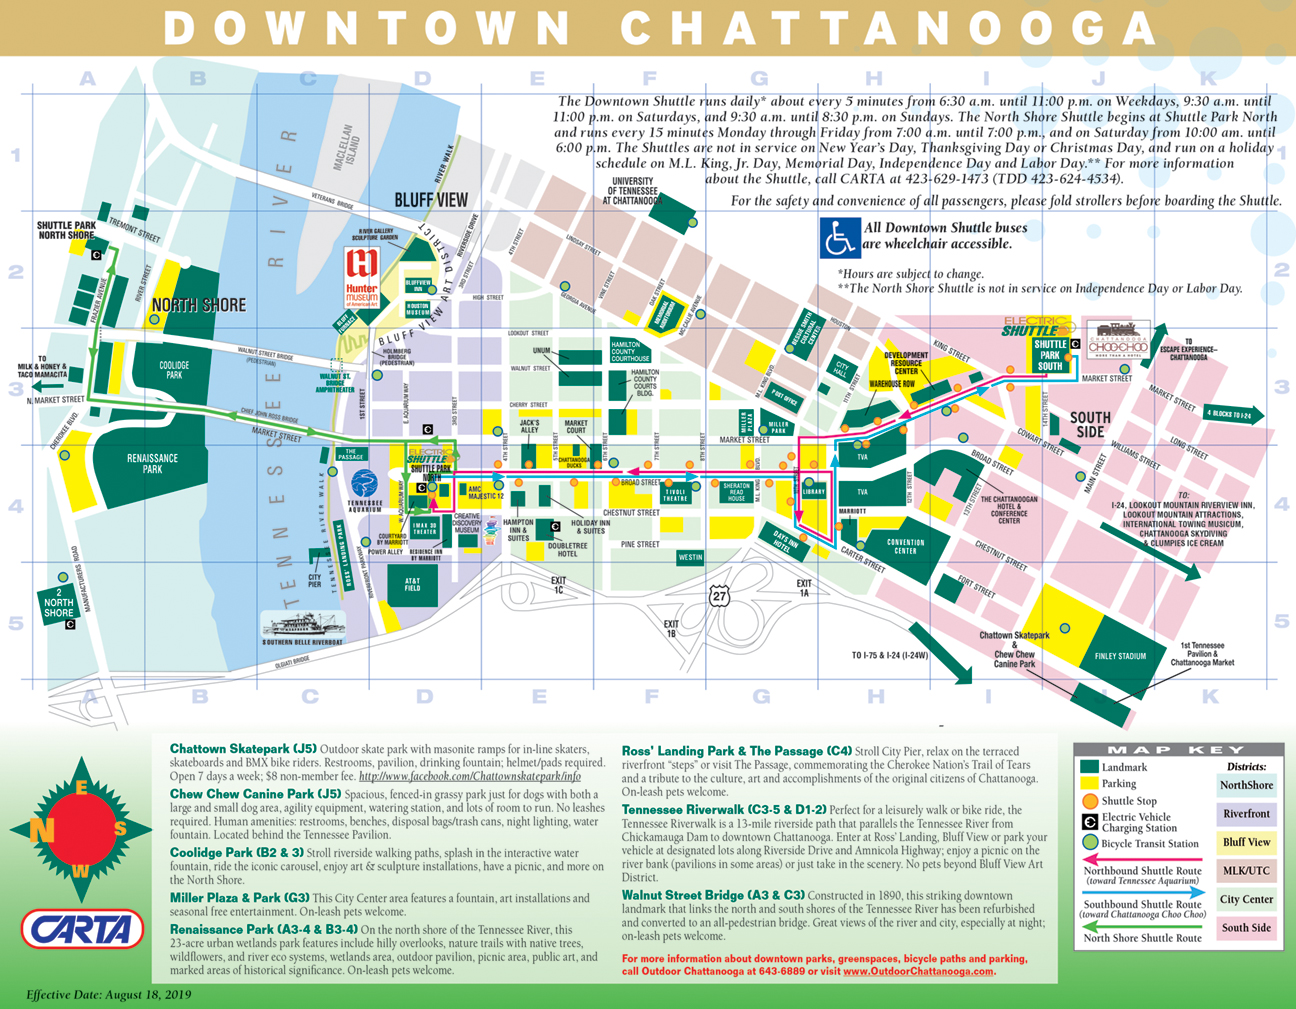 Plan Your Visit to Chattanooga, Tennessee